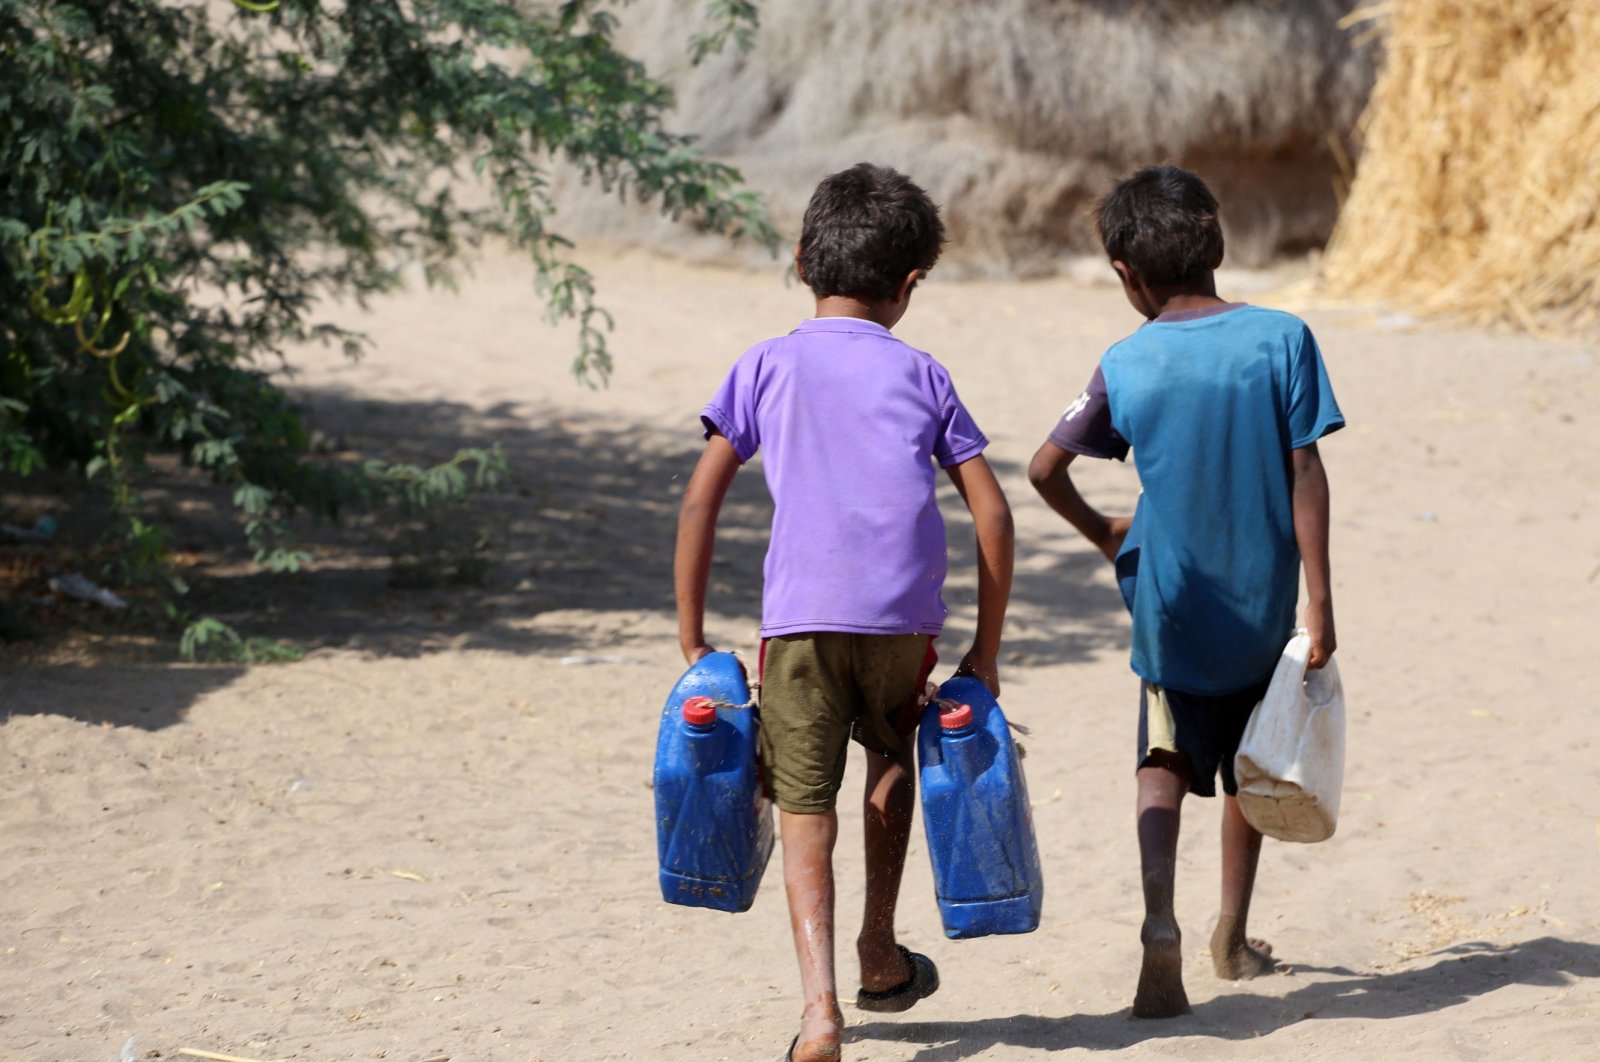 Yemeni children carry jerrycans at a makeshift camp for people who fled fighting between Huthi rebels and the Saudi-backed government forces, in the village of Hays near the conflict zone in Yemen&#039;s western province of Hodeida, on Jan. 28, 2022. (AFP Photo)